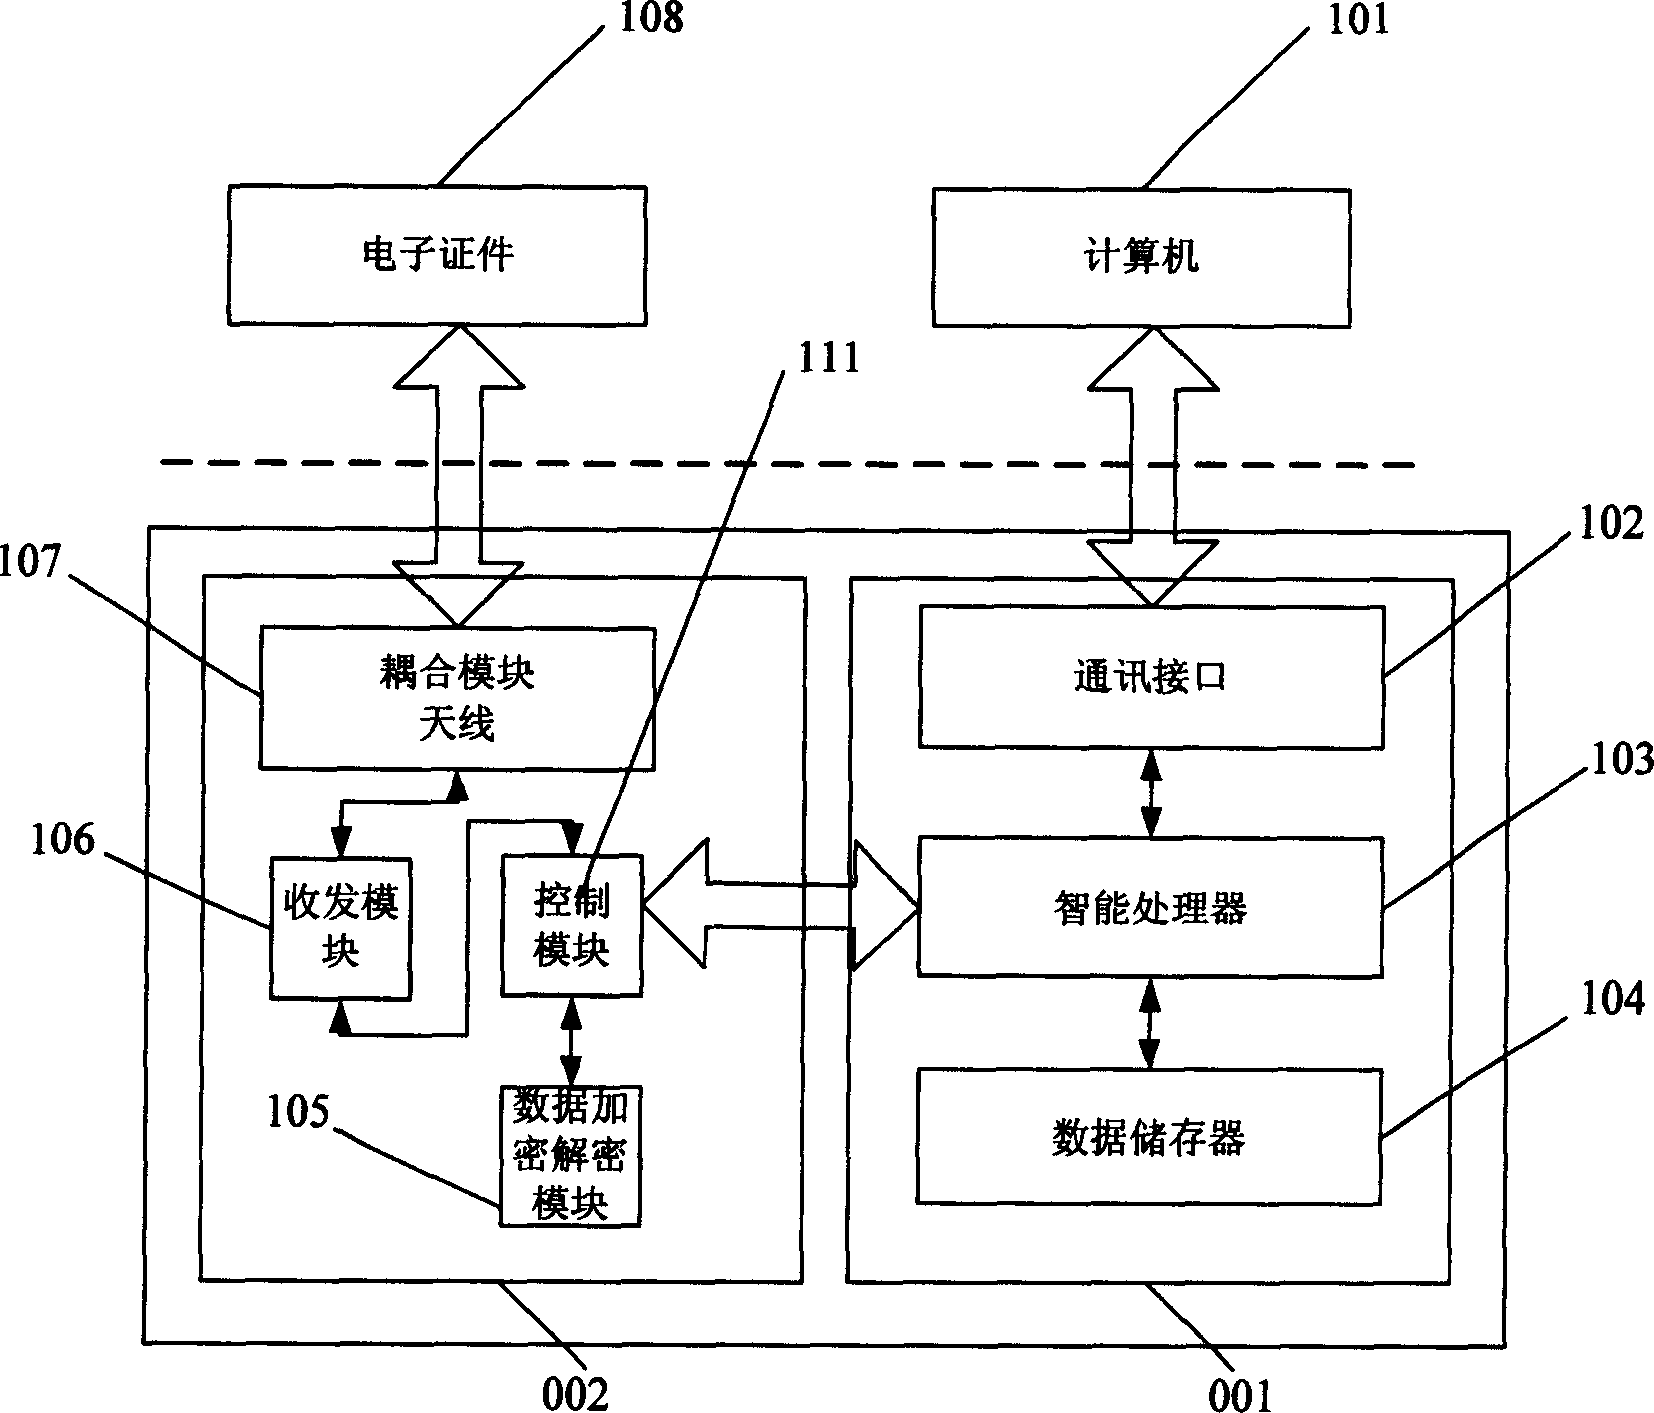 Electronic credential reading device